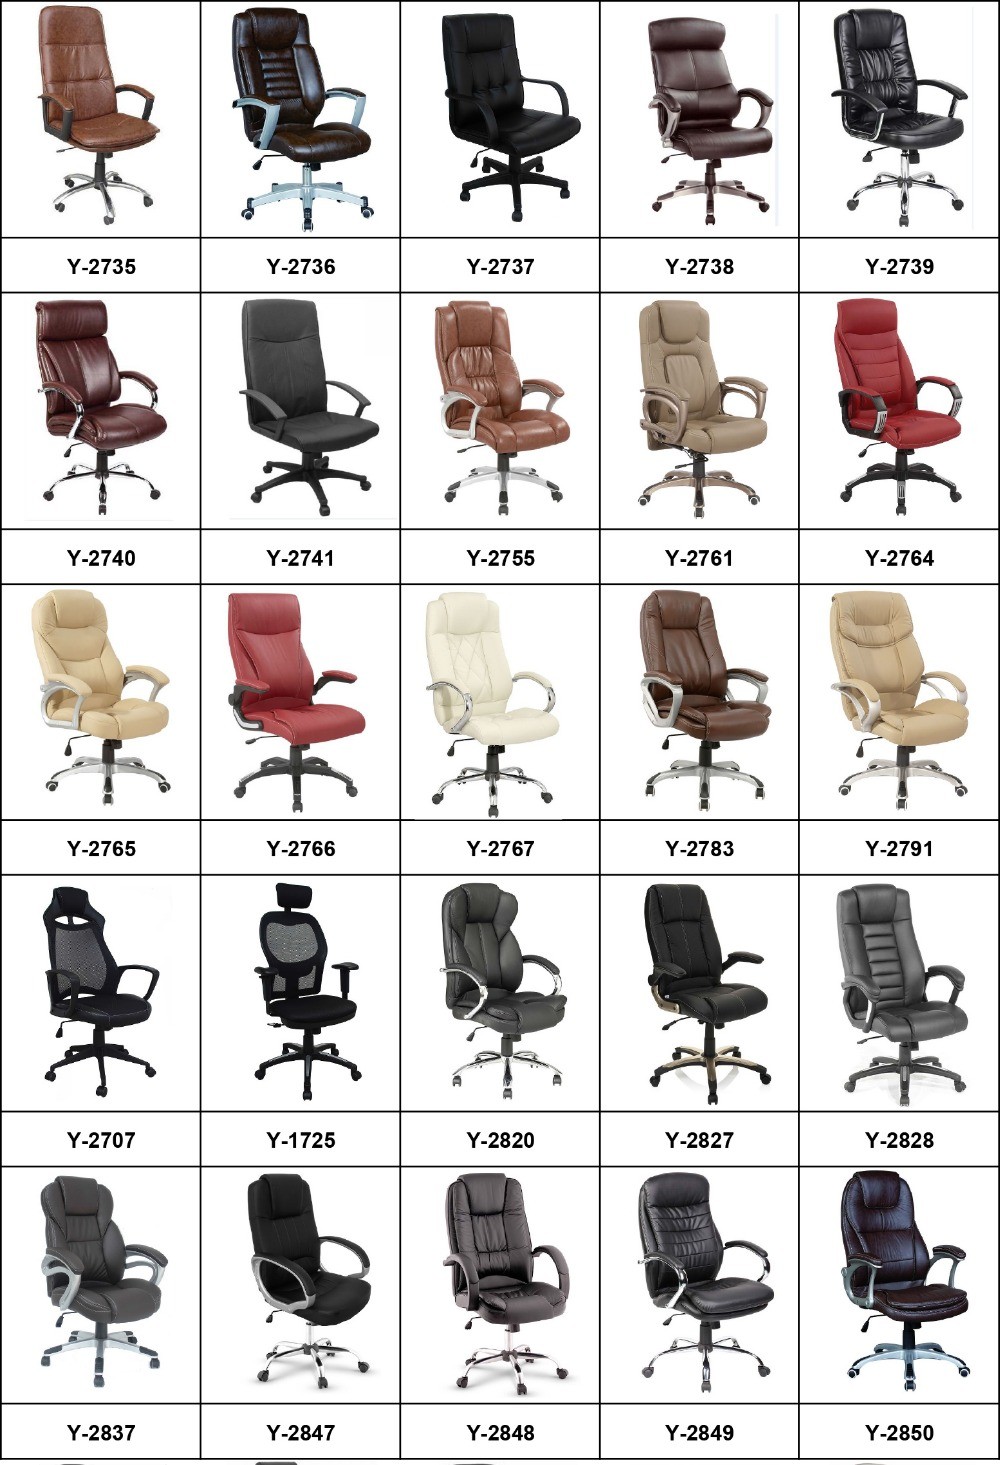 Y-2742 Classic Executive Home Study Computer Office Chair with Prices for Chairs